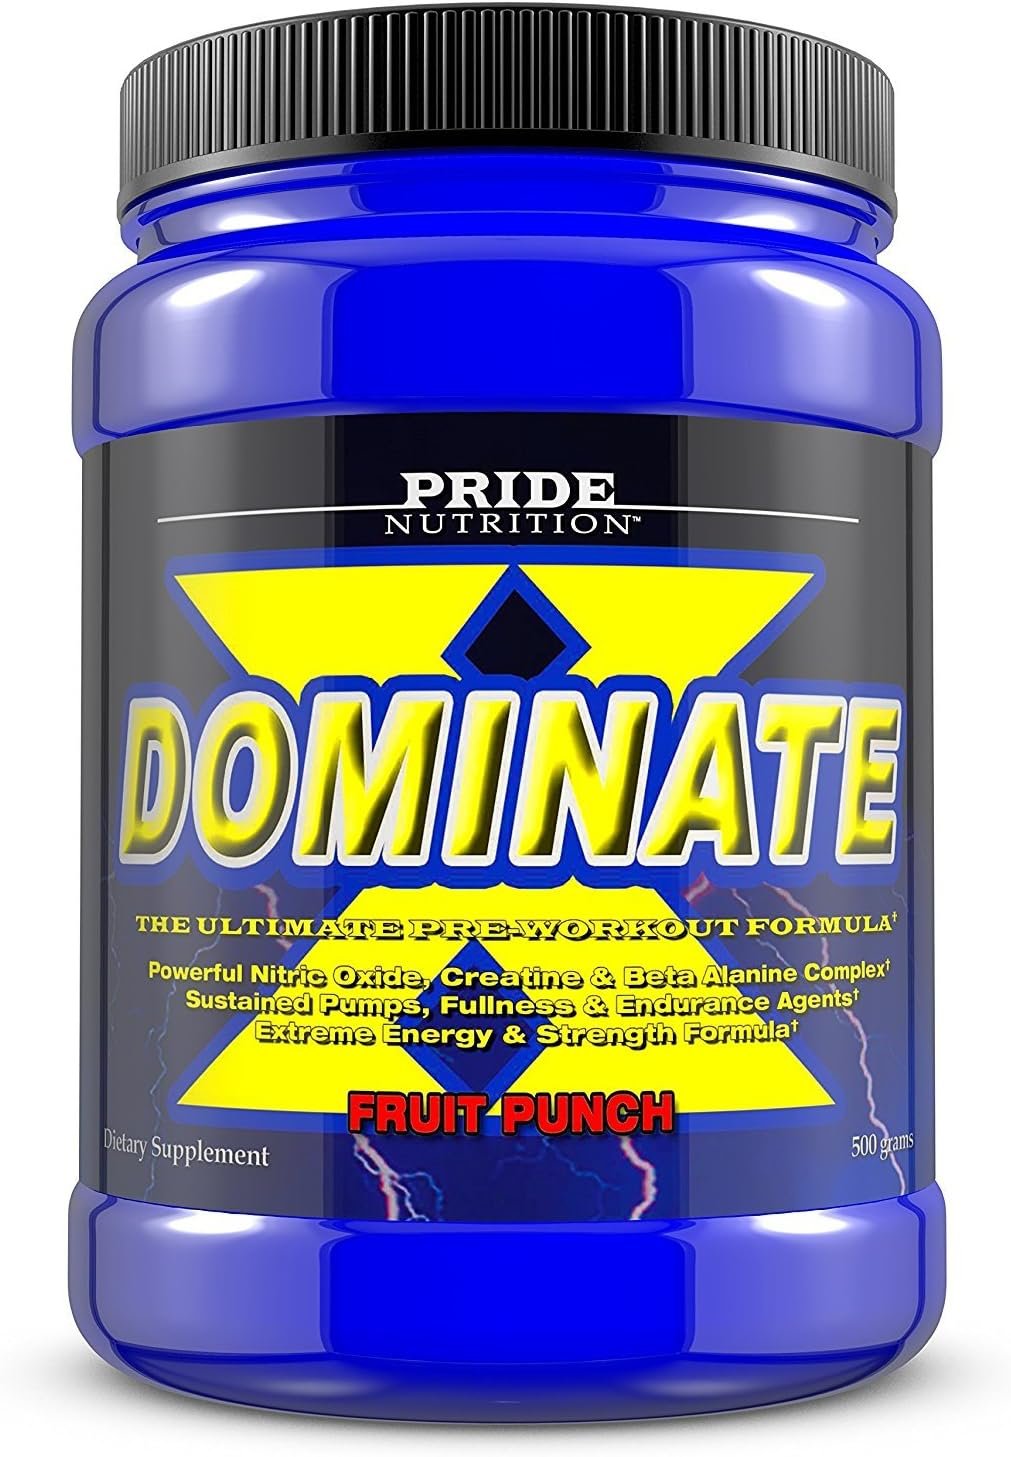 Pride Nutrition Dominate X Pre Workout Supplement - 500g Nitric Oxide  Creatine Pre-Workout Drink for Energy and Endurance - for Men and Women - 25 Servings (Fruit Punch)